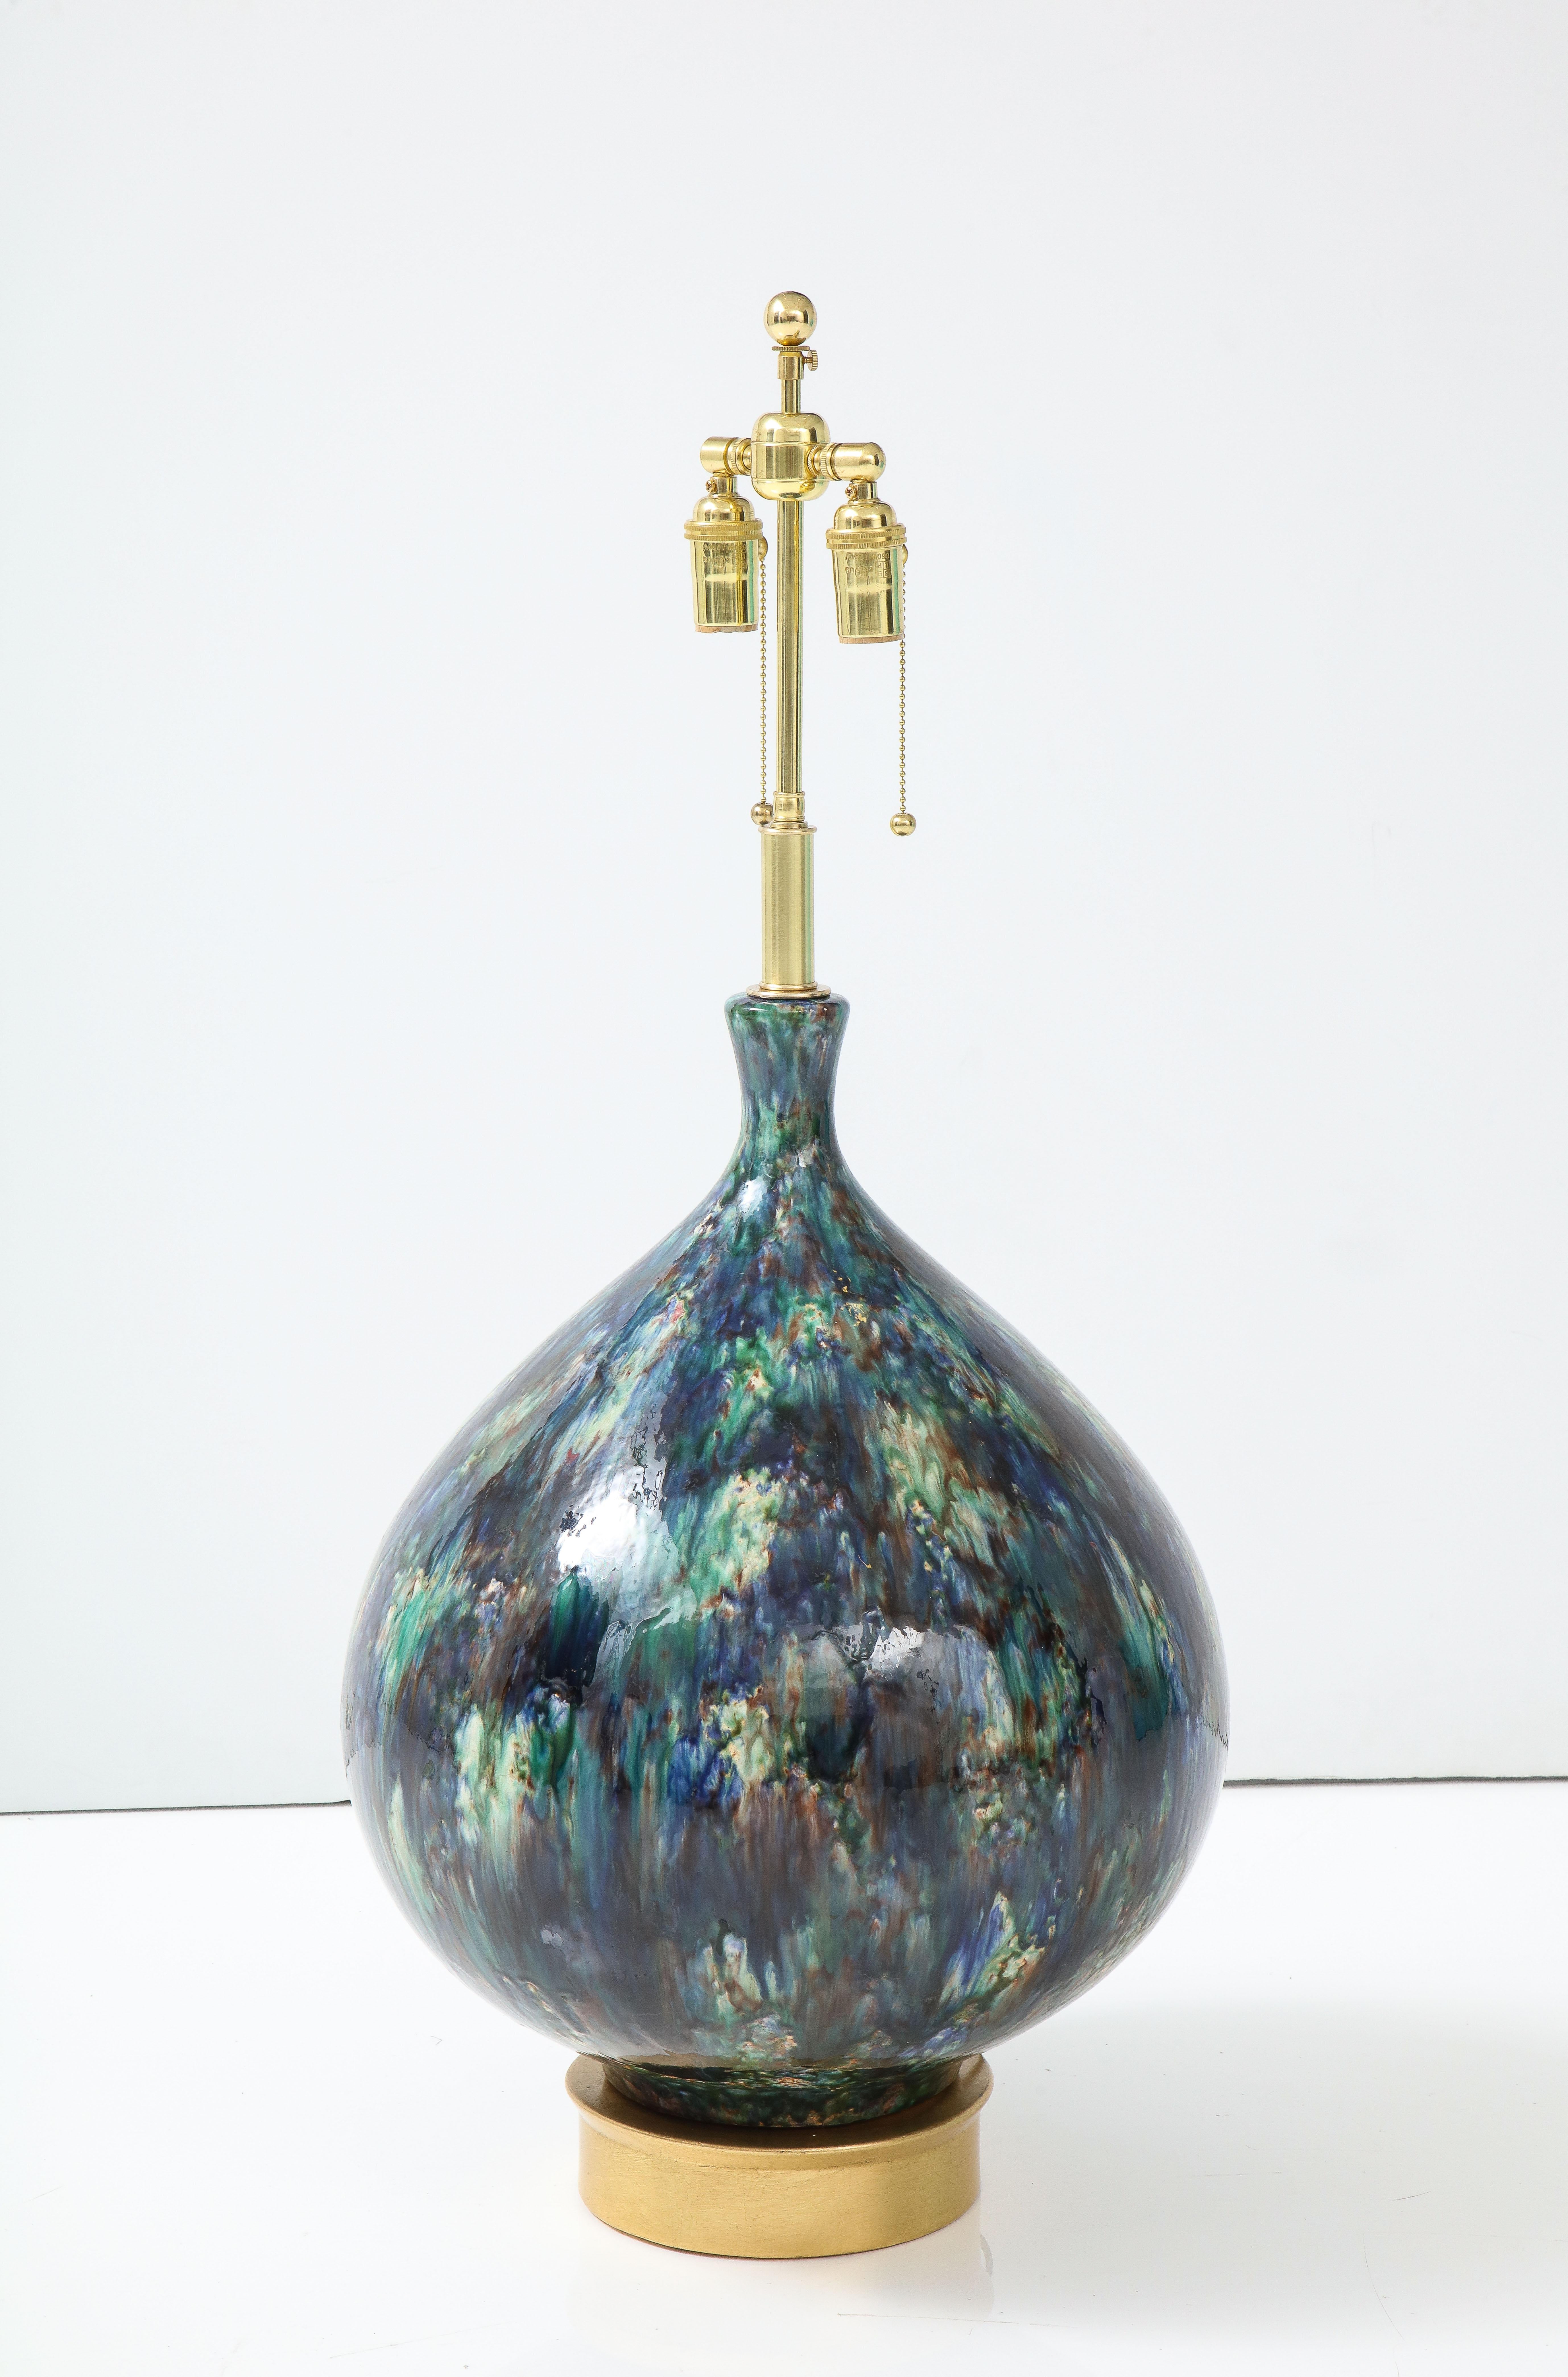 1960's Monumental Italian ceramic lamp with a beautiful glazed finish.
The lamp sits on a gilt leafed wooden base and has been Newly rewired 
with an adjustable polished brass double cluster.
The height to the Top of the ceramic is 24